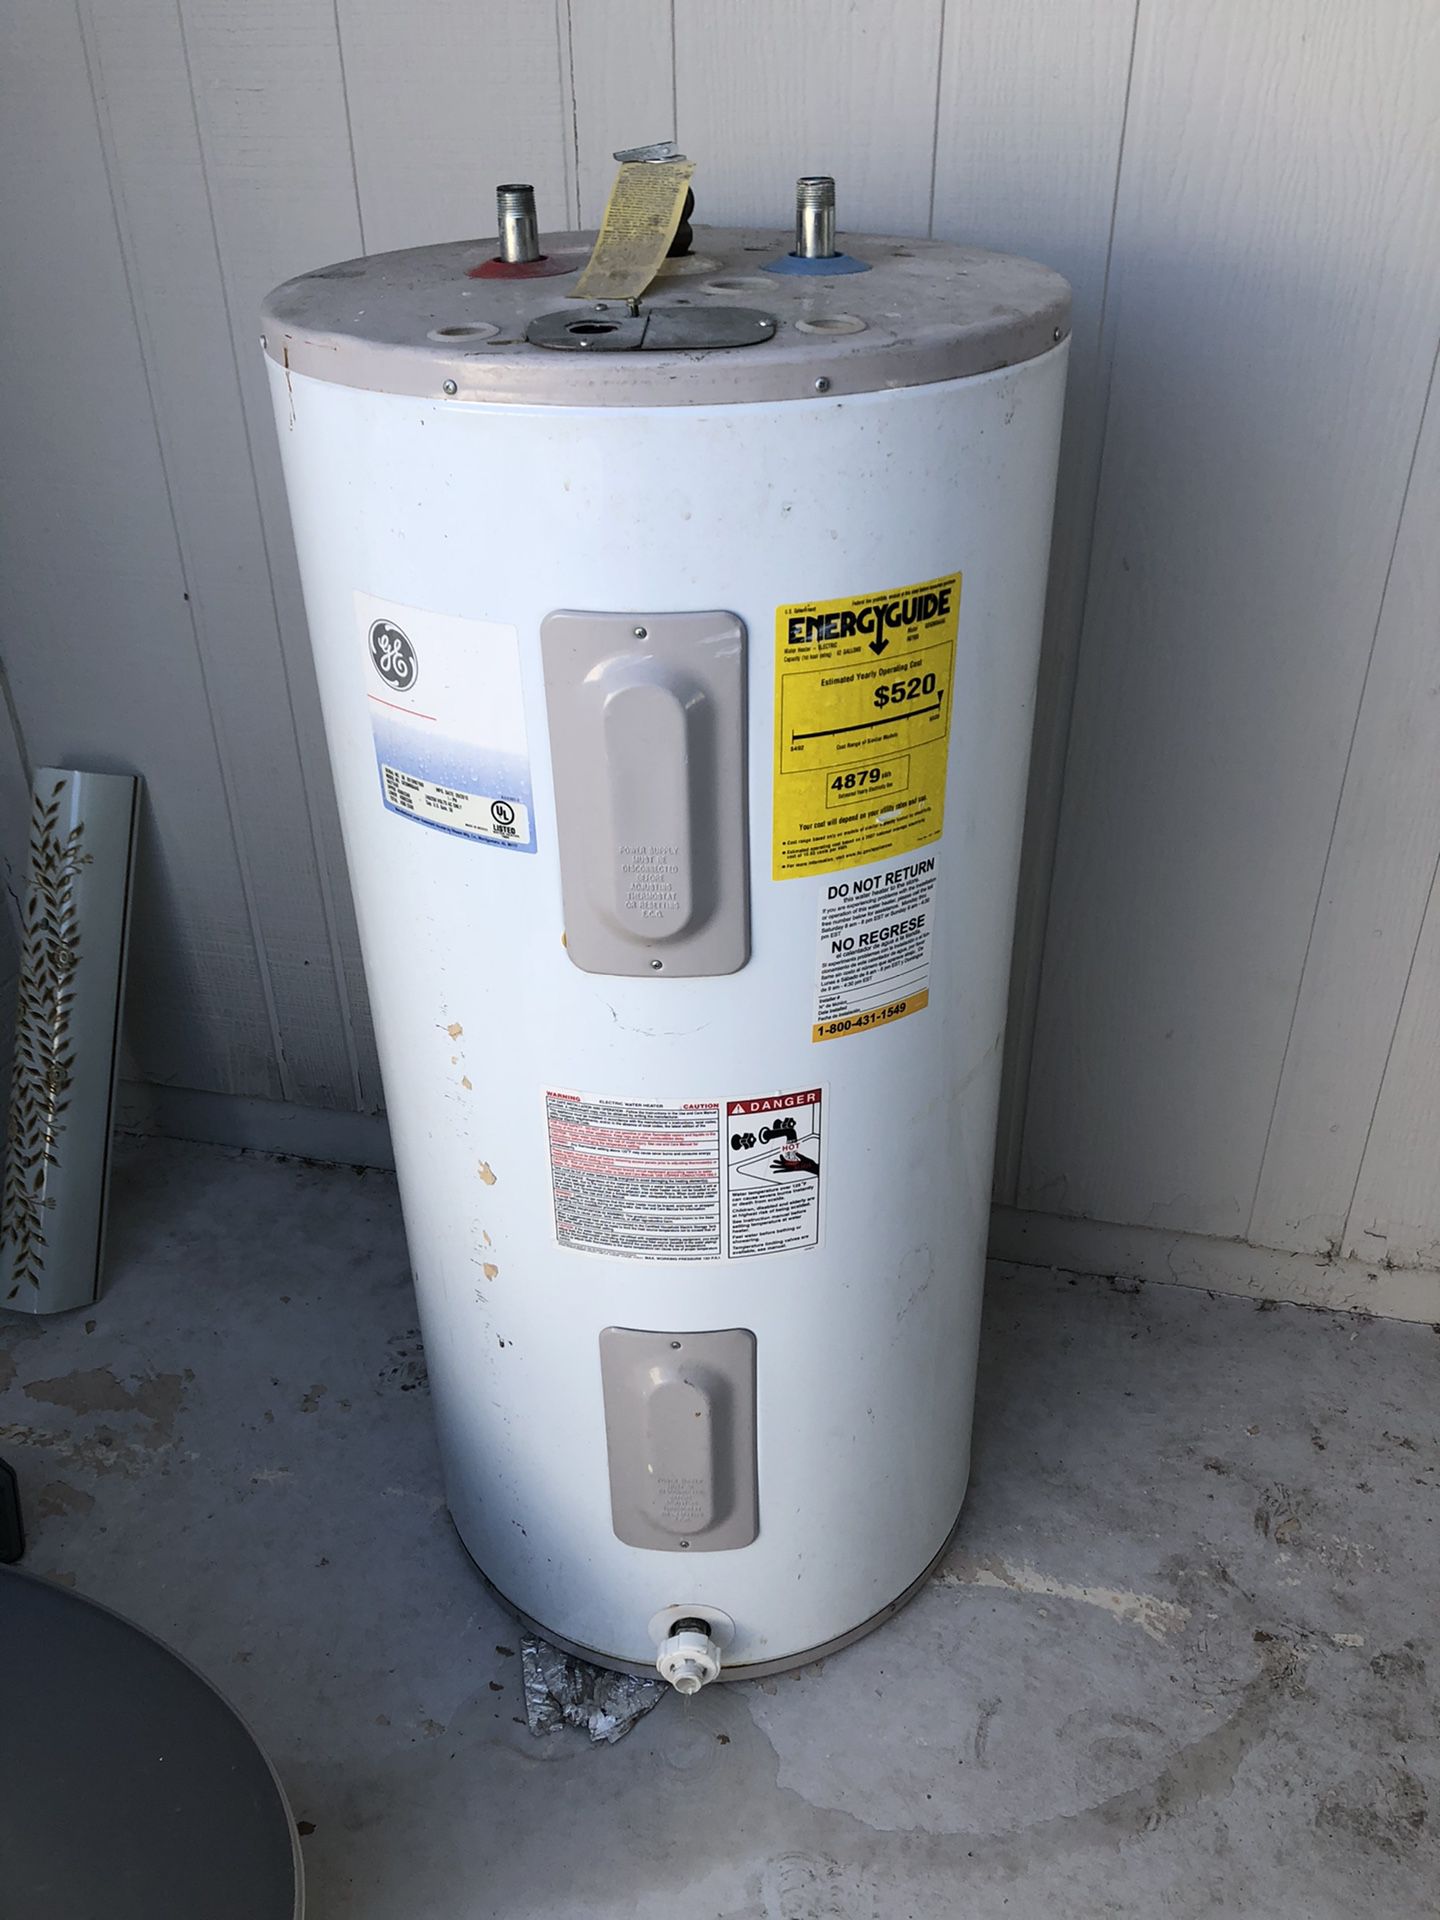 GE electric water heater 50 gal used but good works fine